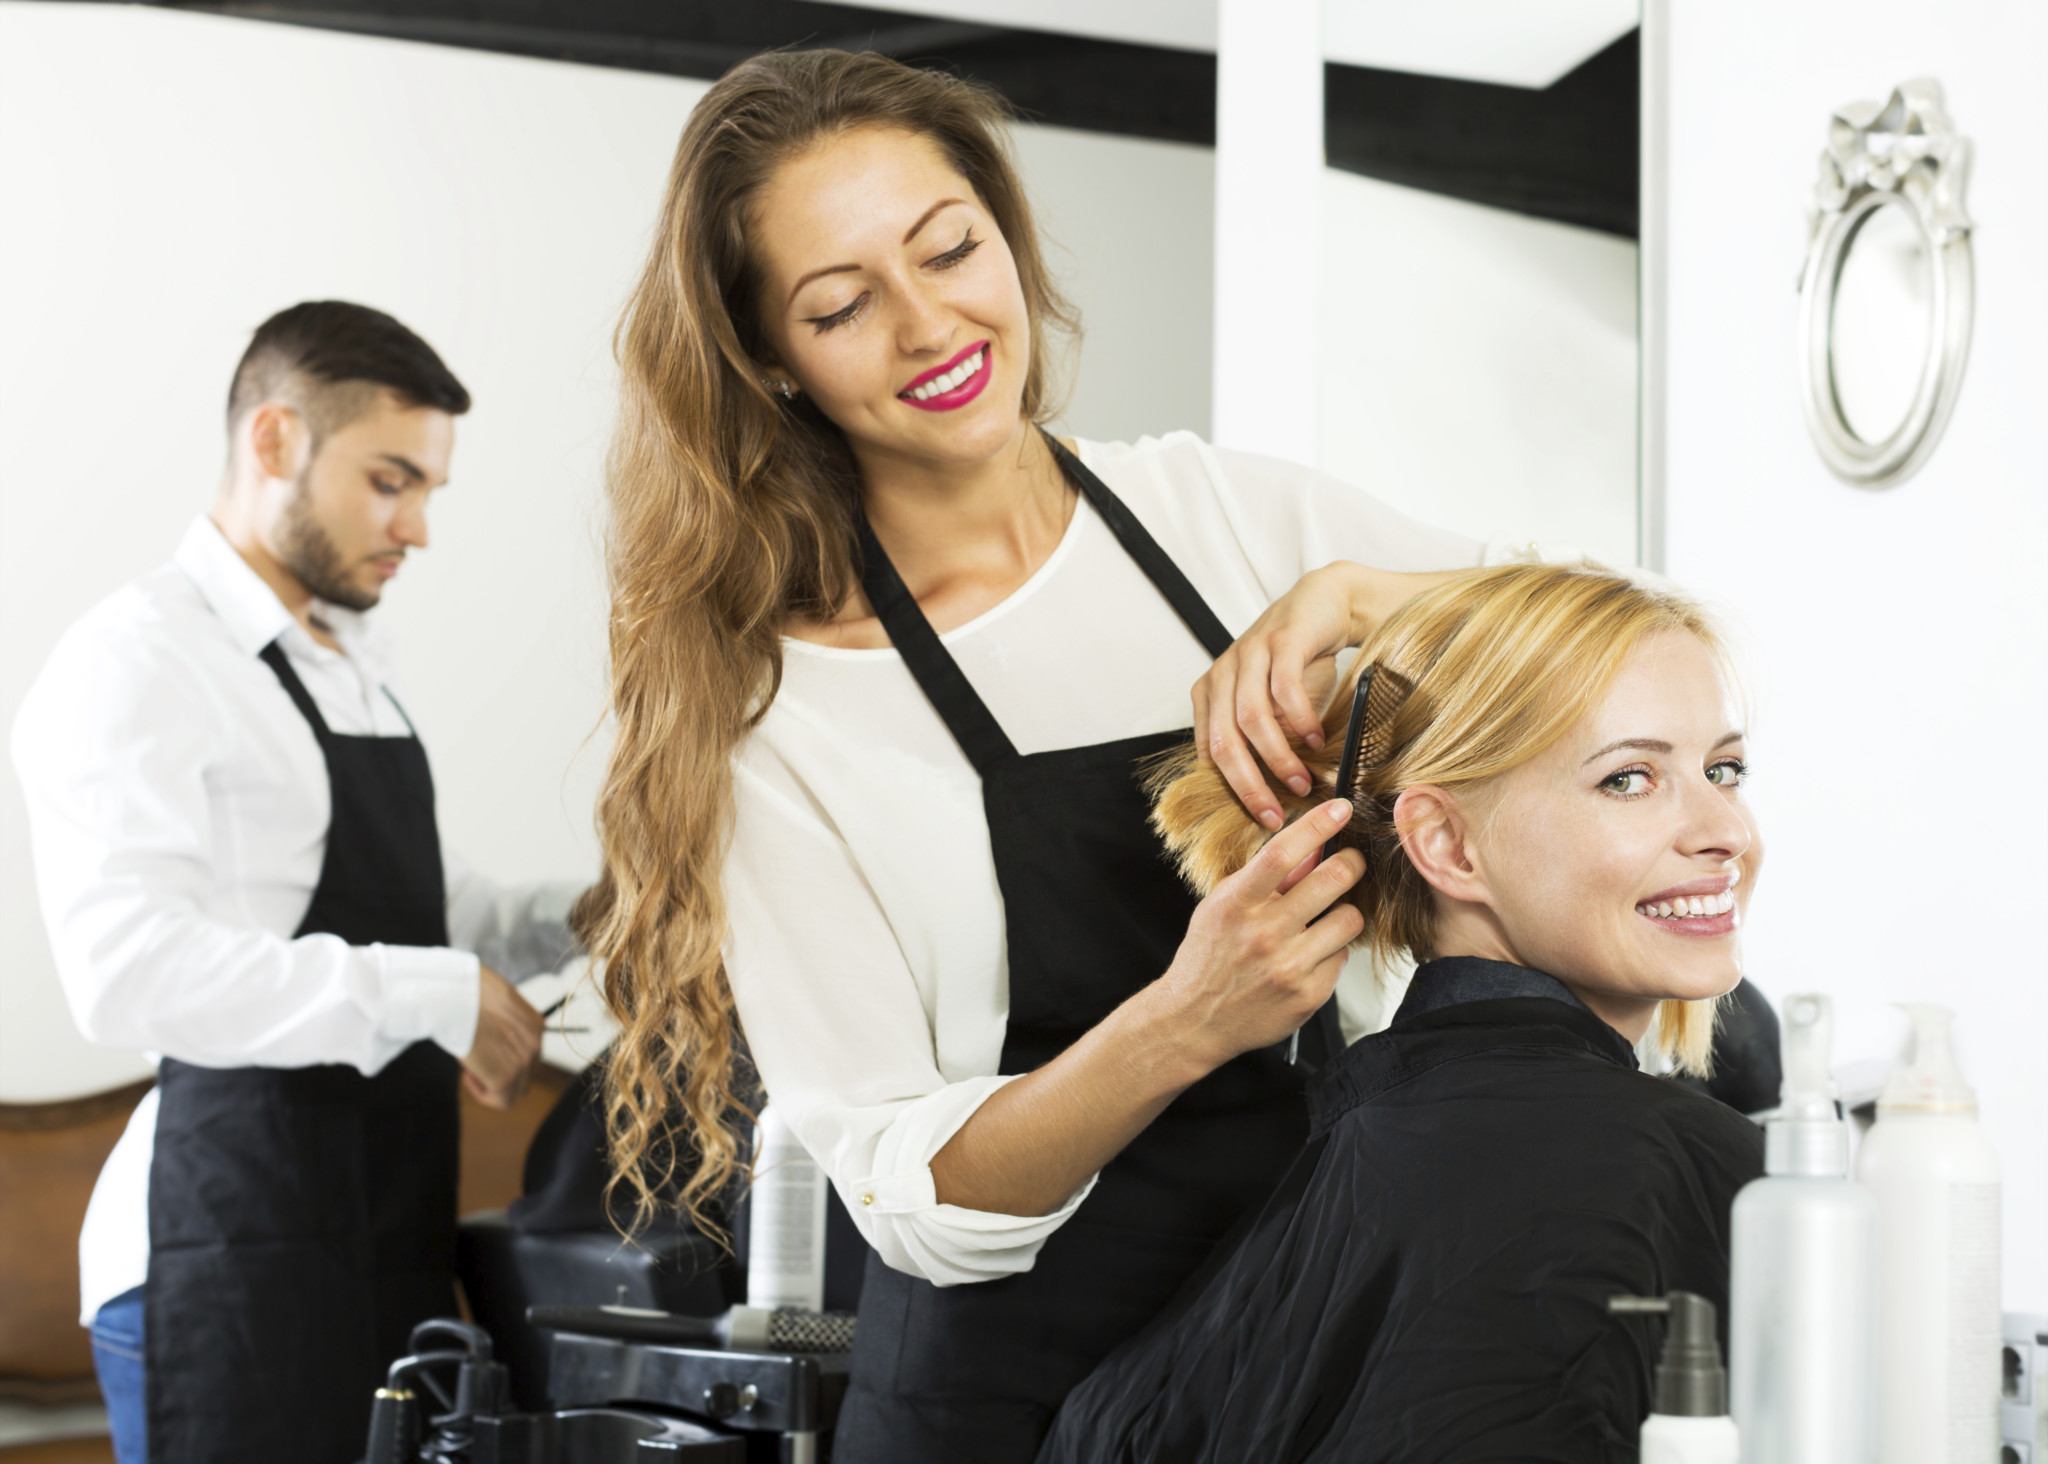 10 Things We All Love about the Hair Salon